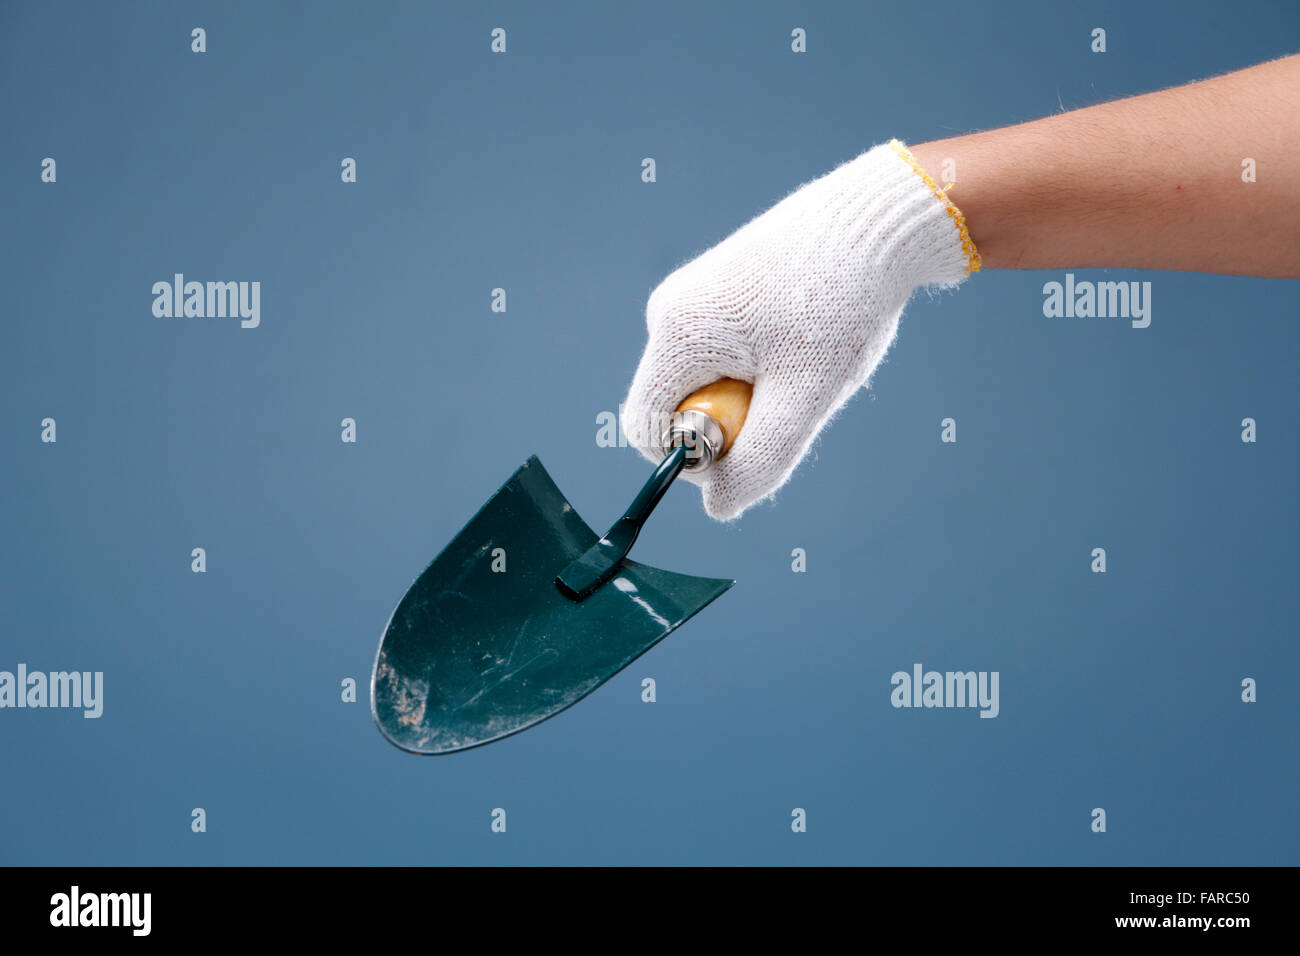 Hand holding garden trowel on coloured background. Stock Photo